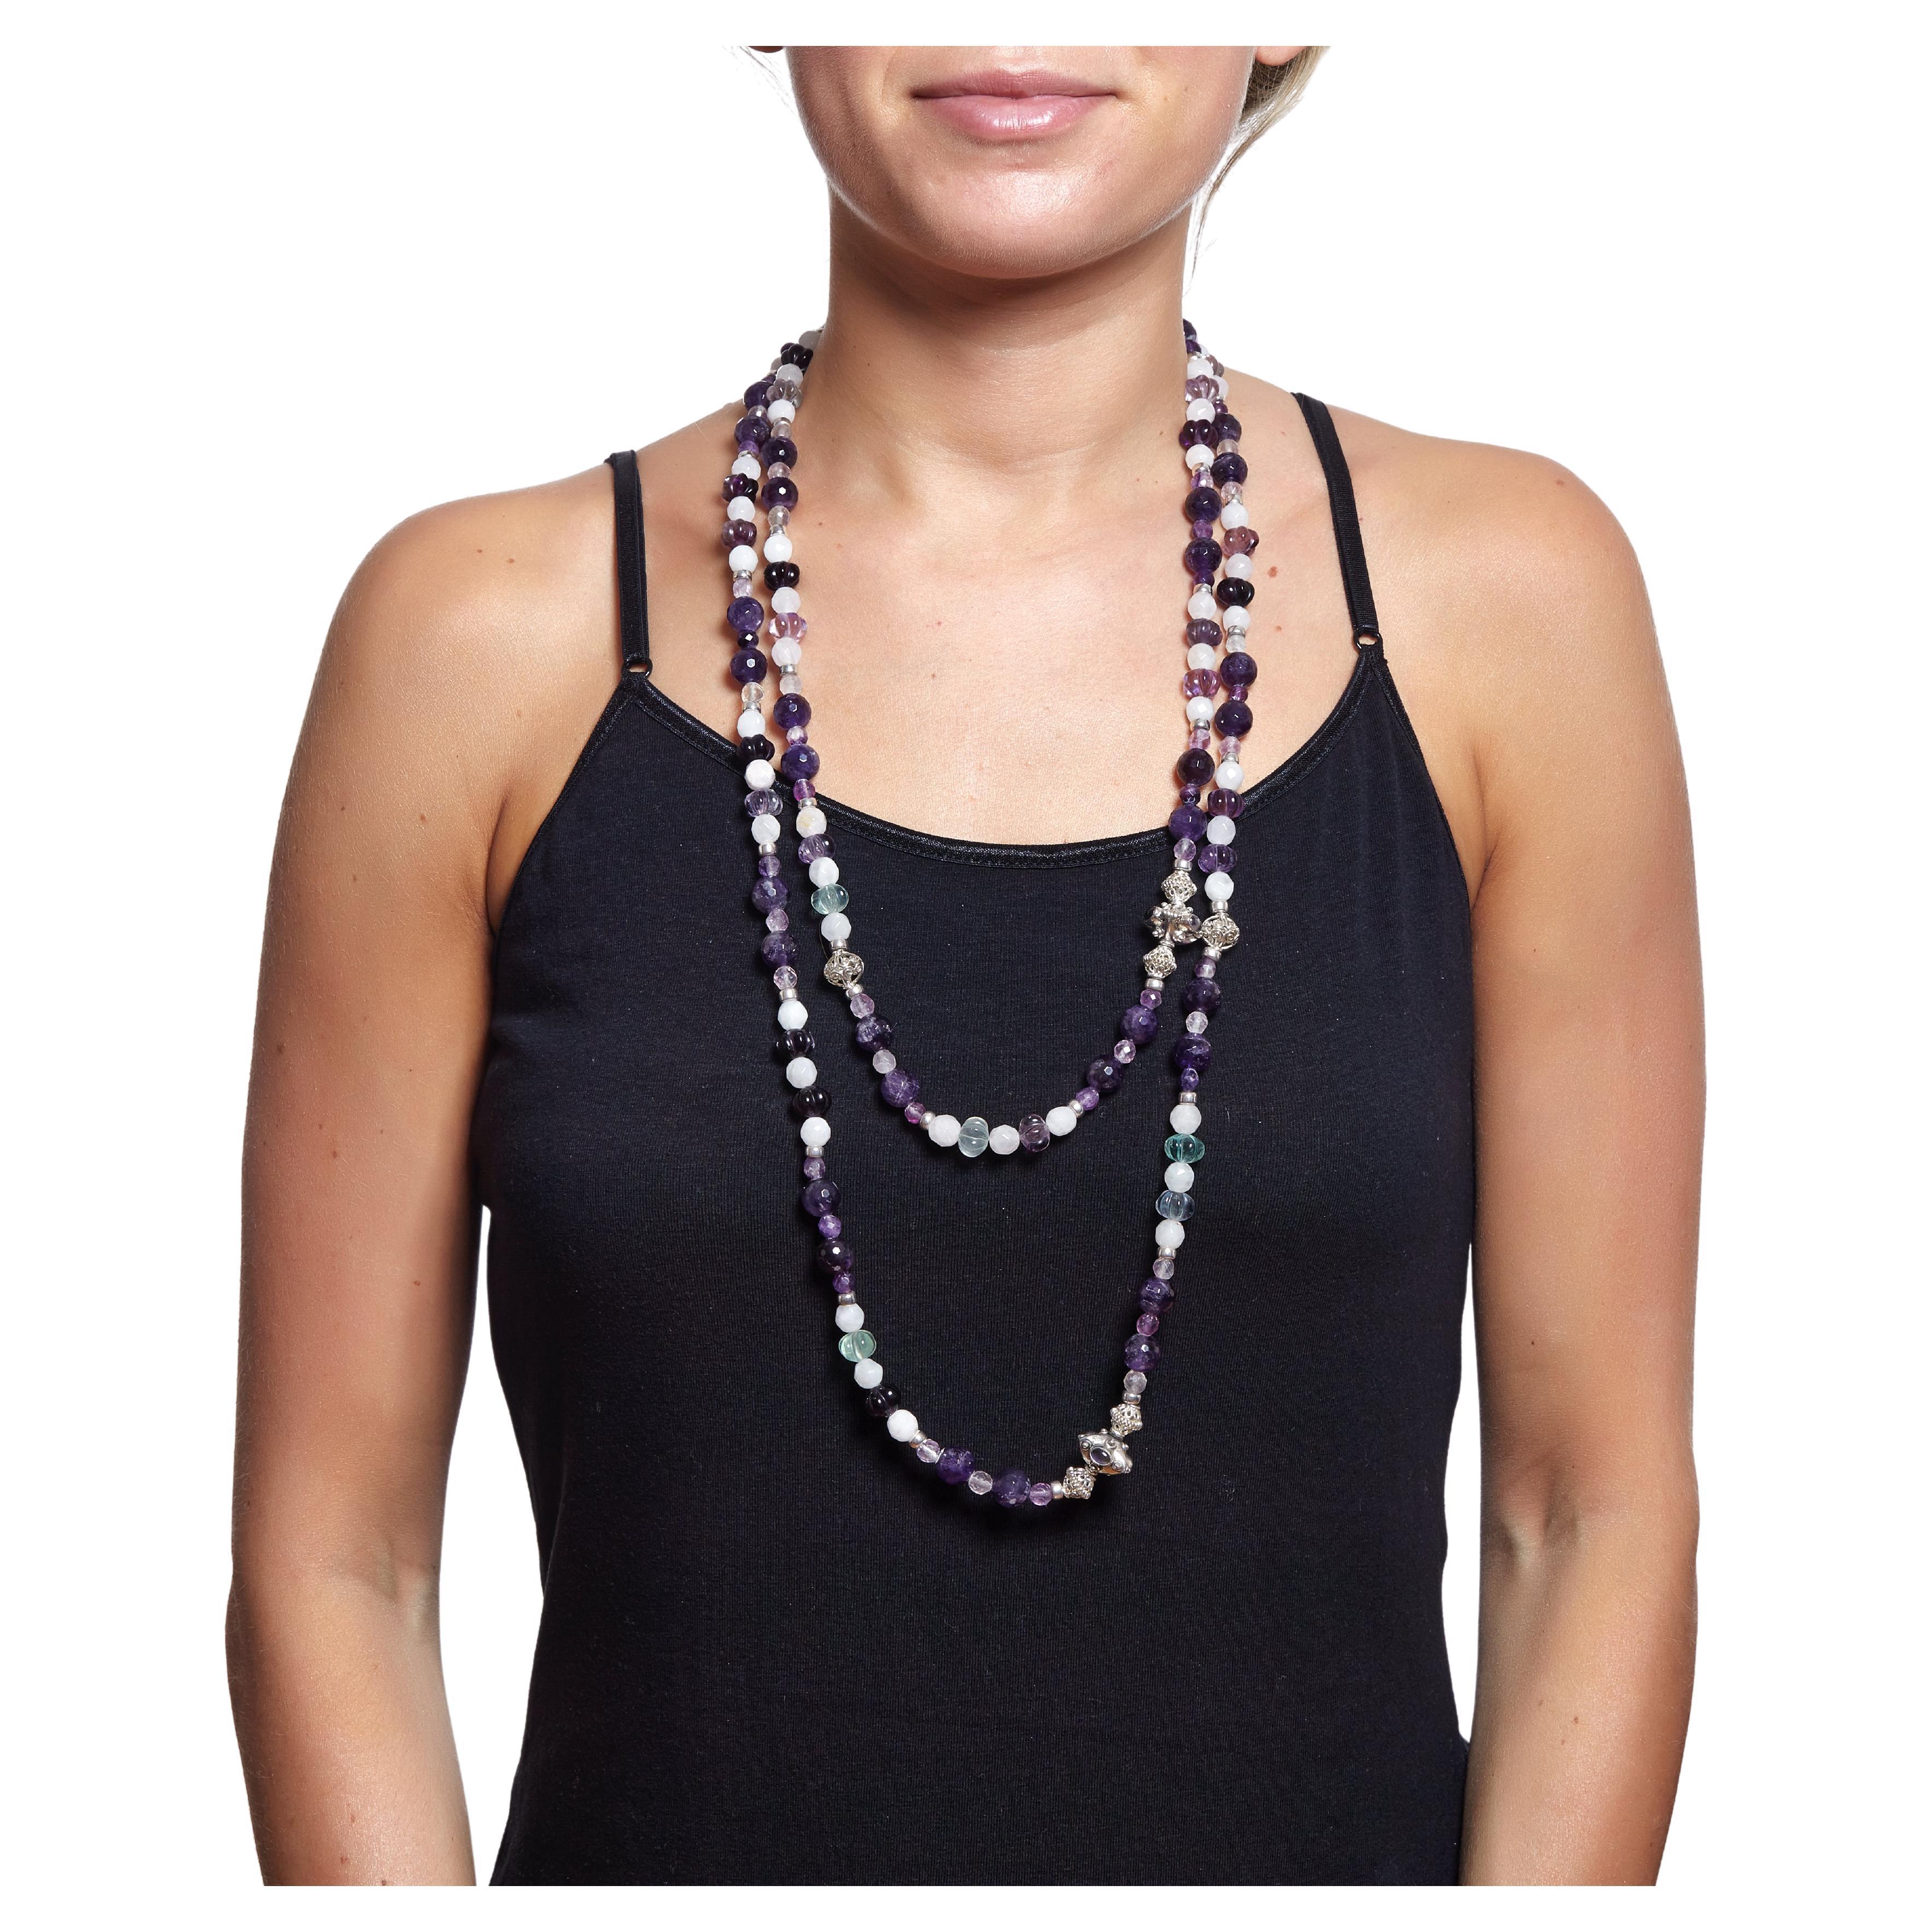 One of Kind 60 inch long Gemstone Necklace with Faceted deep Purple Amethyst,  Carved Melon Pumpkin shaped Fluorite beads,  Faceted Rose Quartz,  with Rhodium Plated Amethyst Sterling focal beads surrounded with beautifully detailed Sterling